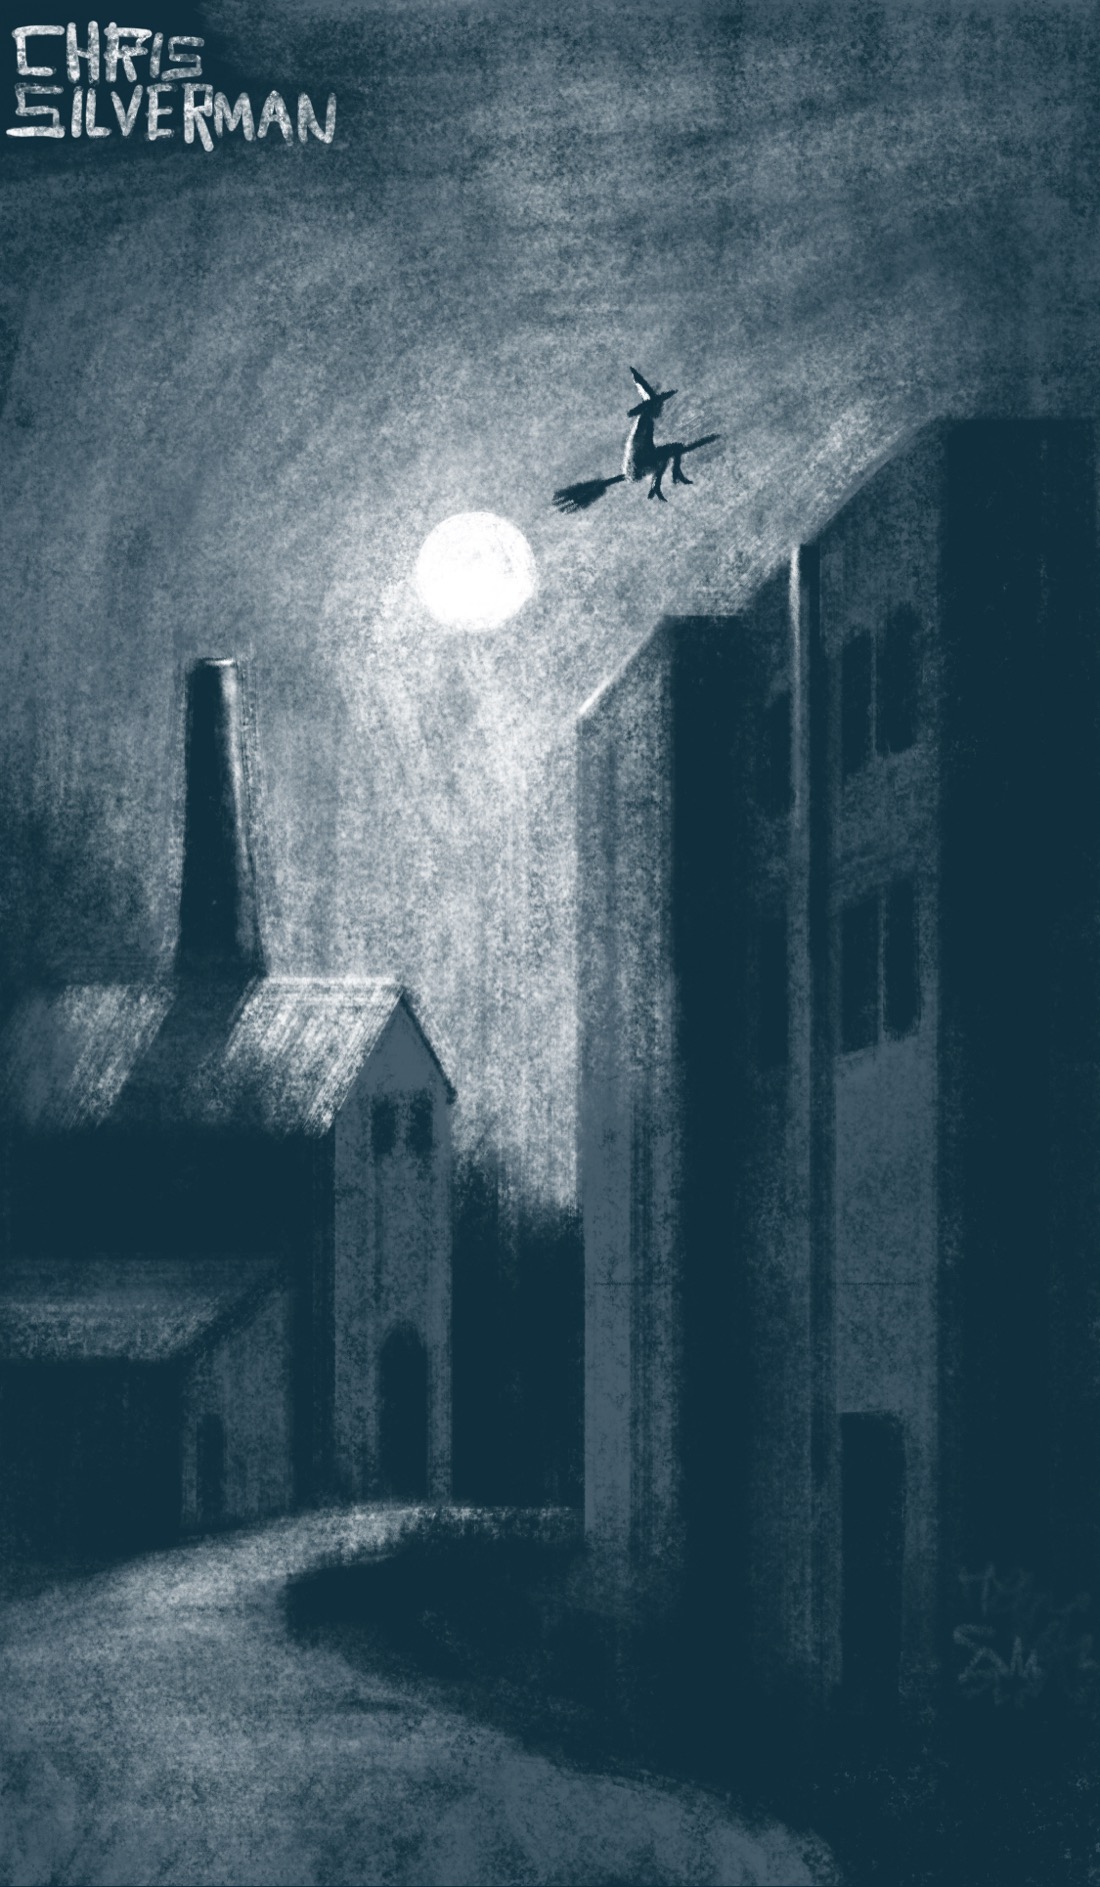 A desolate street winds through an abandoned town at night. The road looks bumpy and uneven, and curves among abandoned apartment blocks and a factory with a tall smoke stack. It is mostly dark; the scene is illuminated only by a full moon. The sky looks partly cloudy. In the sky, directly to the right of the moon and a little above it, is a witch on a broomstick.